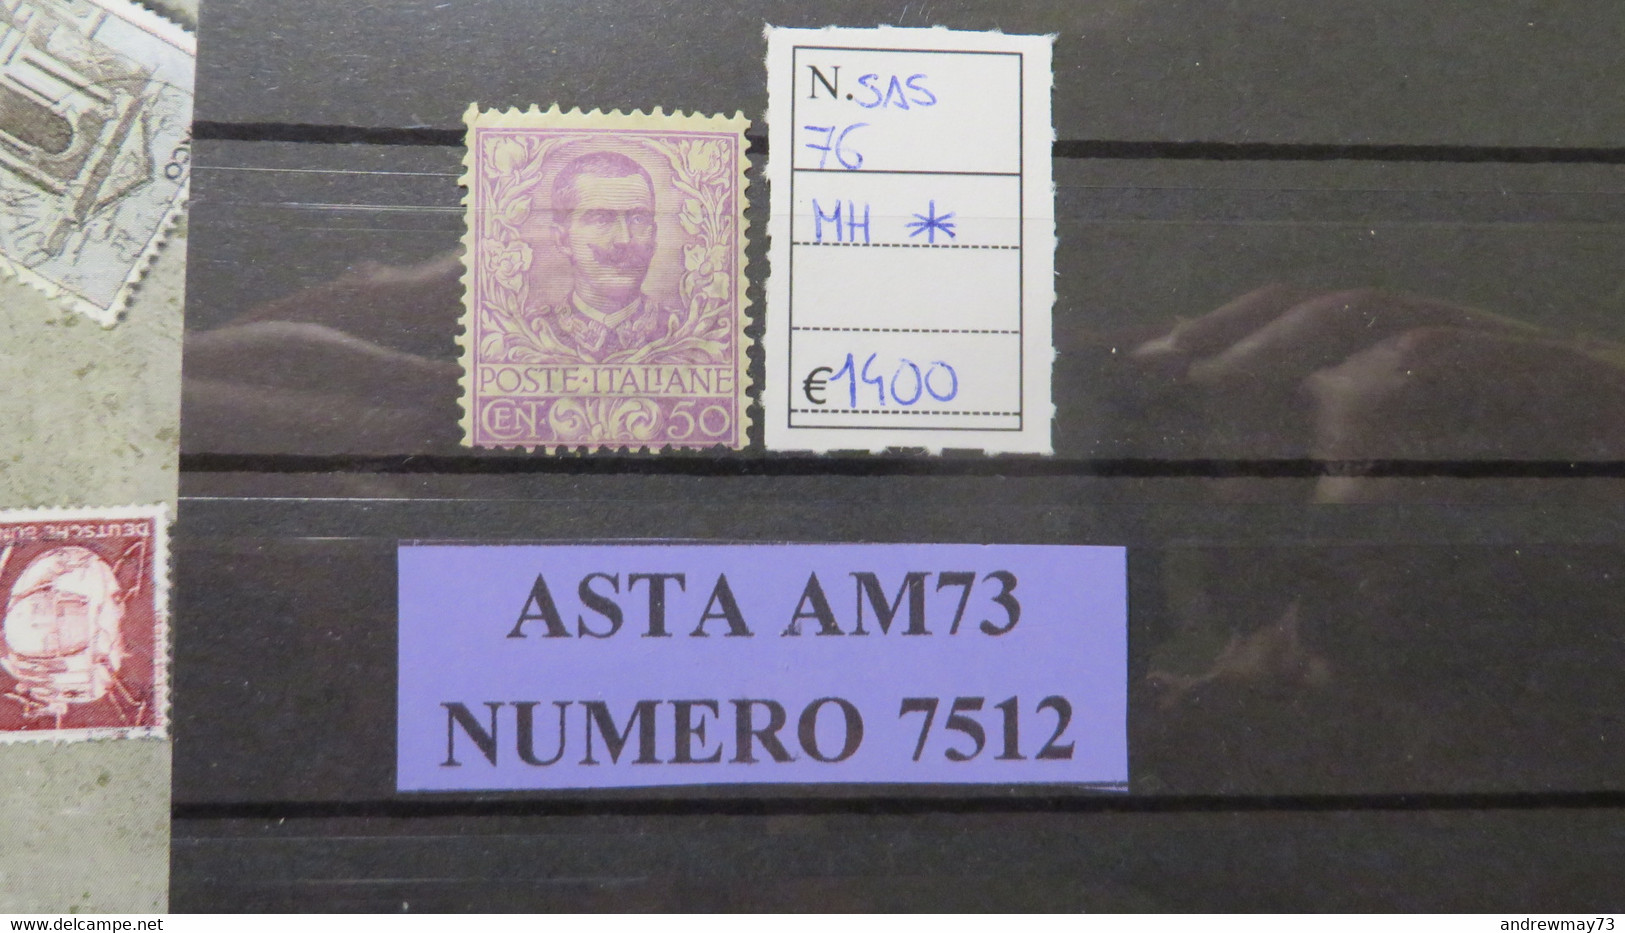 ITALY KINGDOM- NICE MH RARE STAMP- 1400 € ON CATALOGUE -signed - Mint/hinged